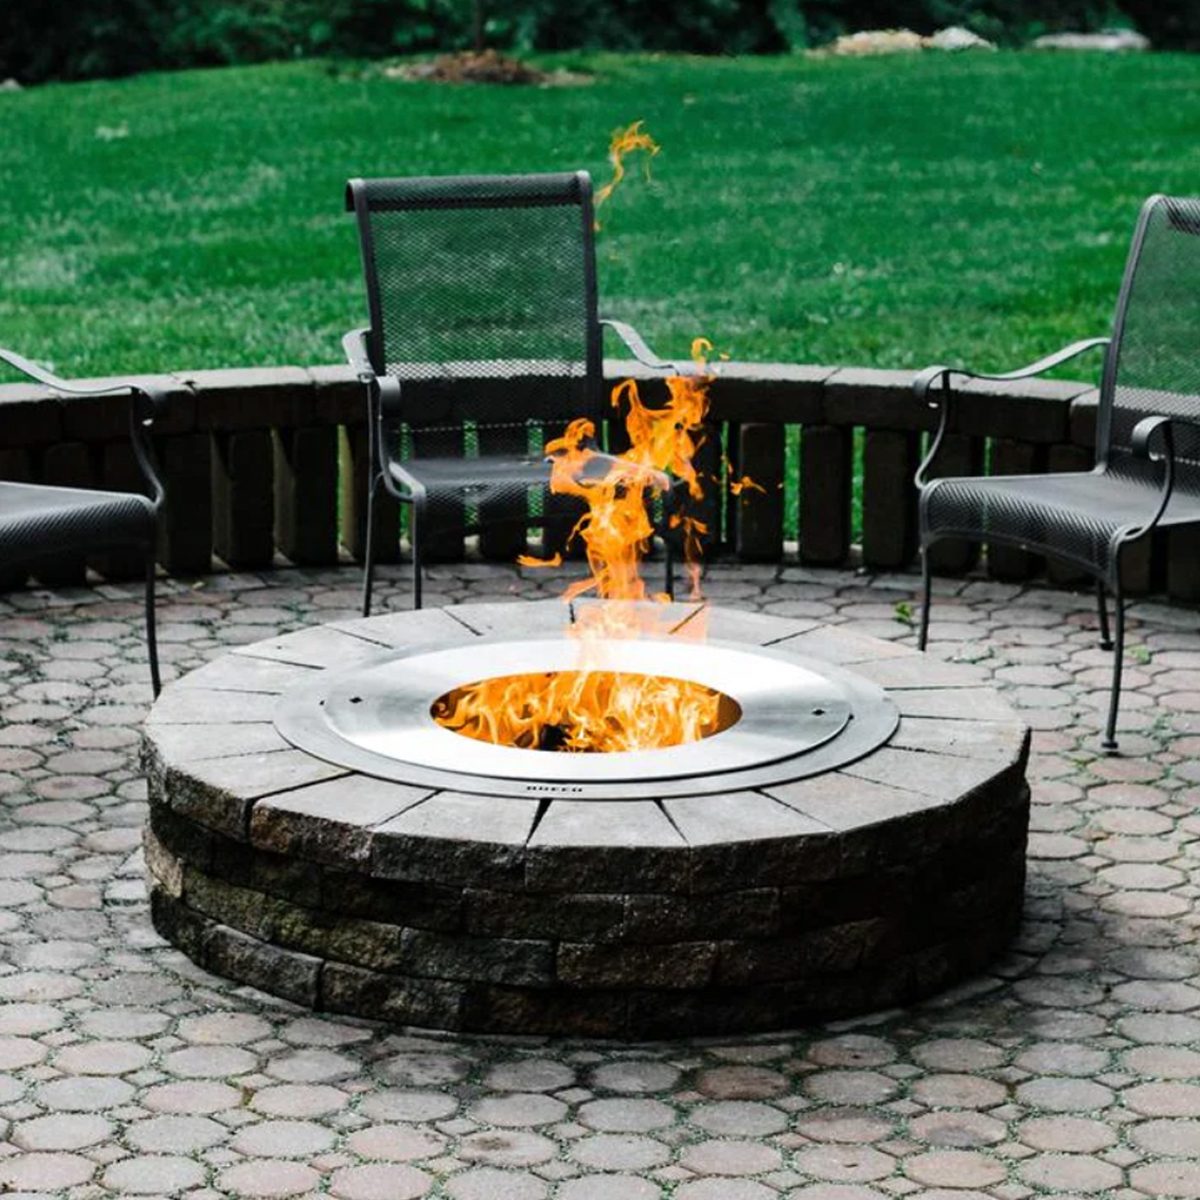 8 Best Smokeless Fire Pits to Buy in 2022